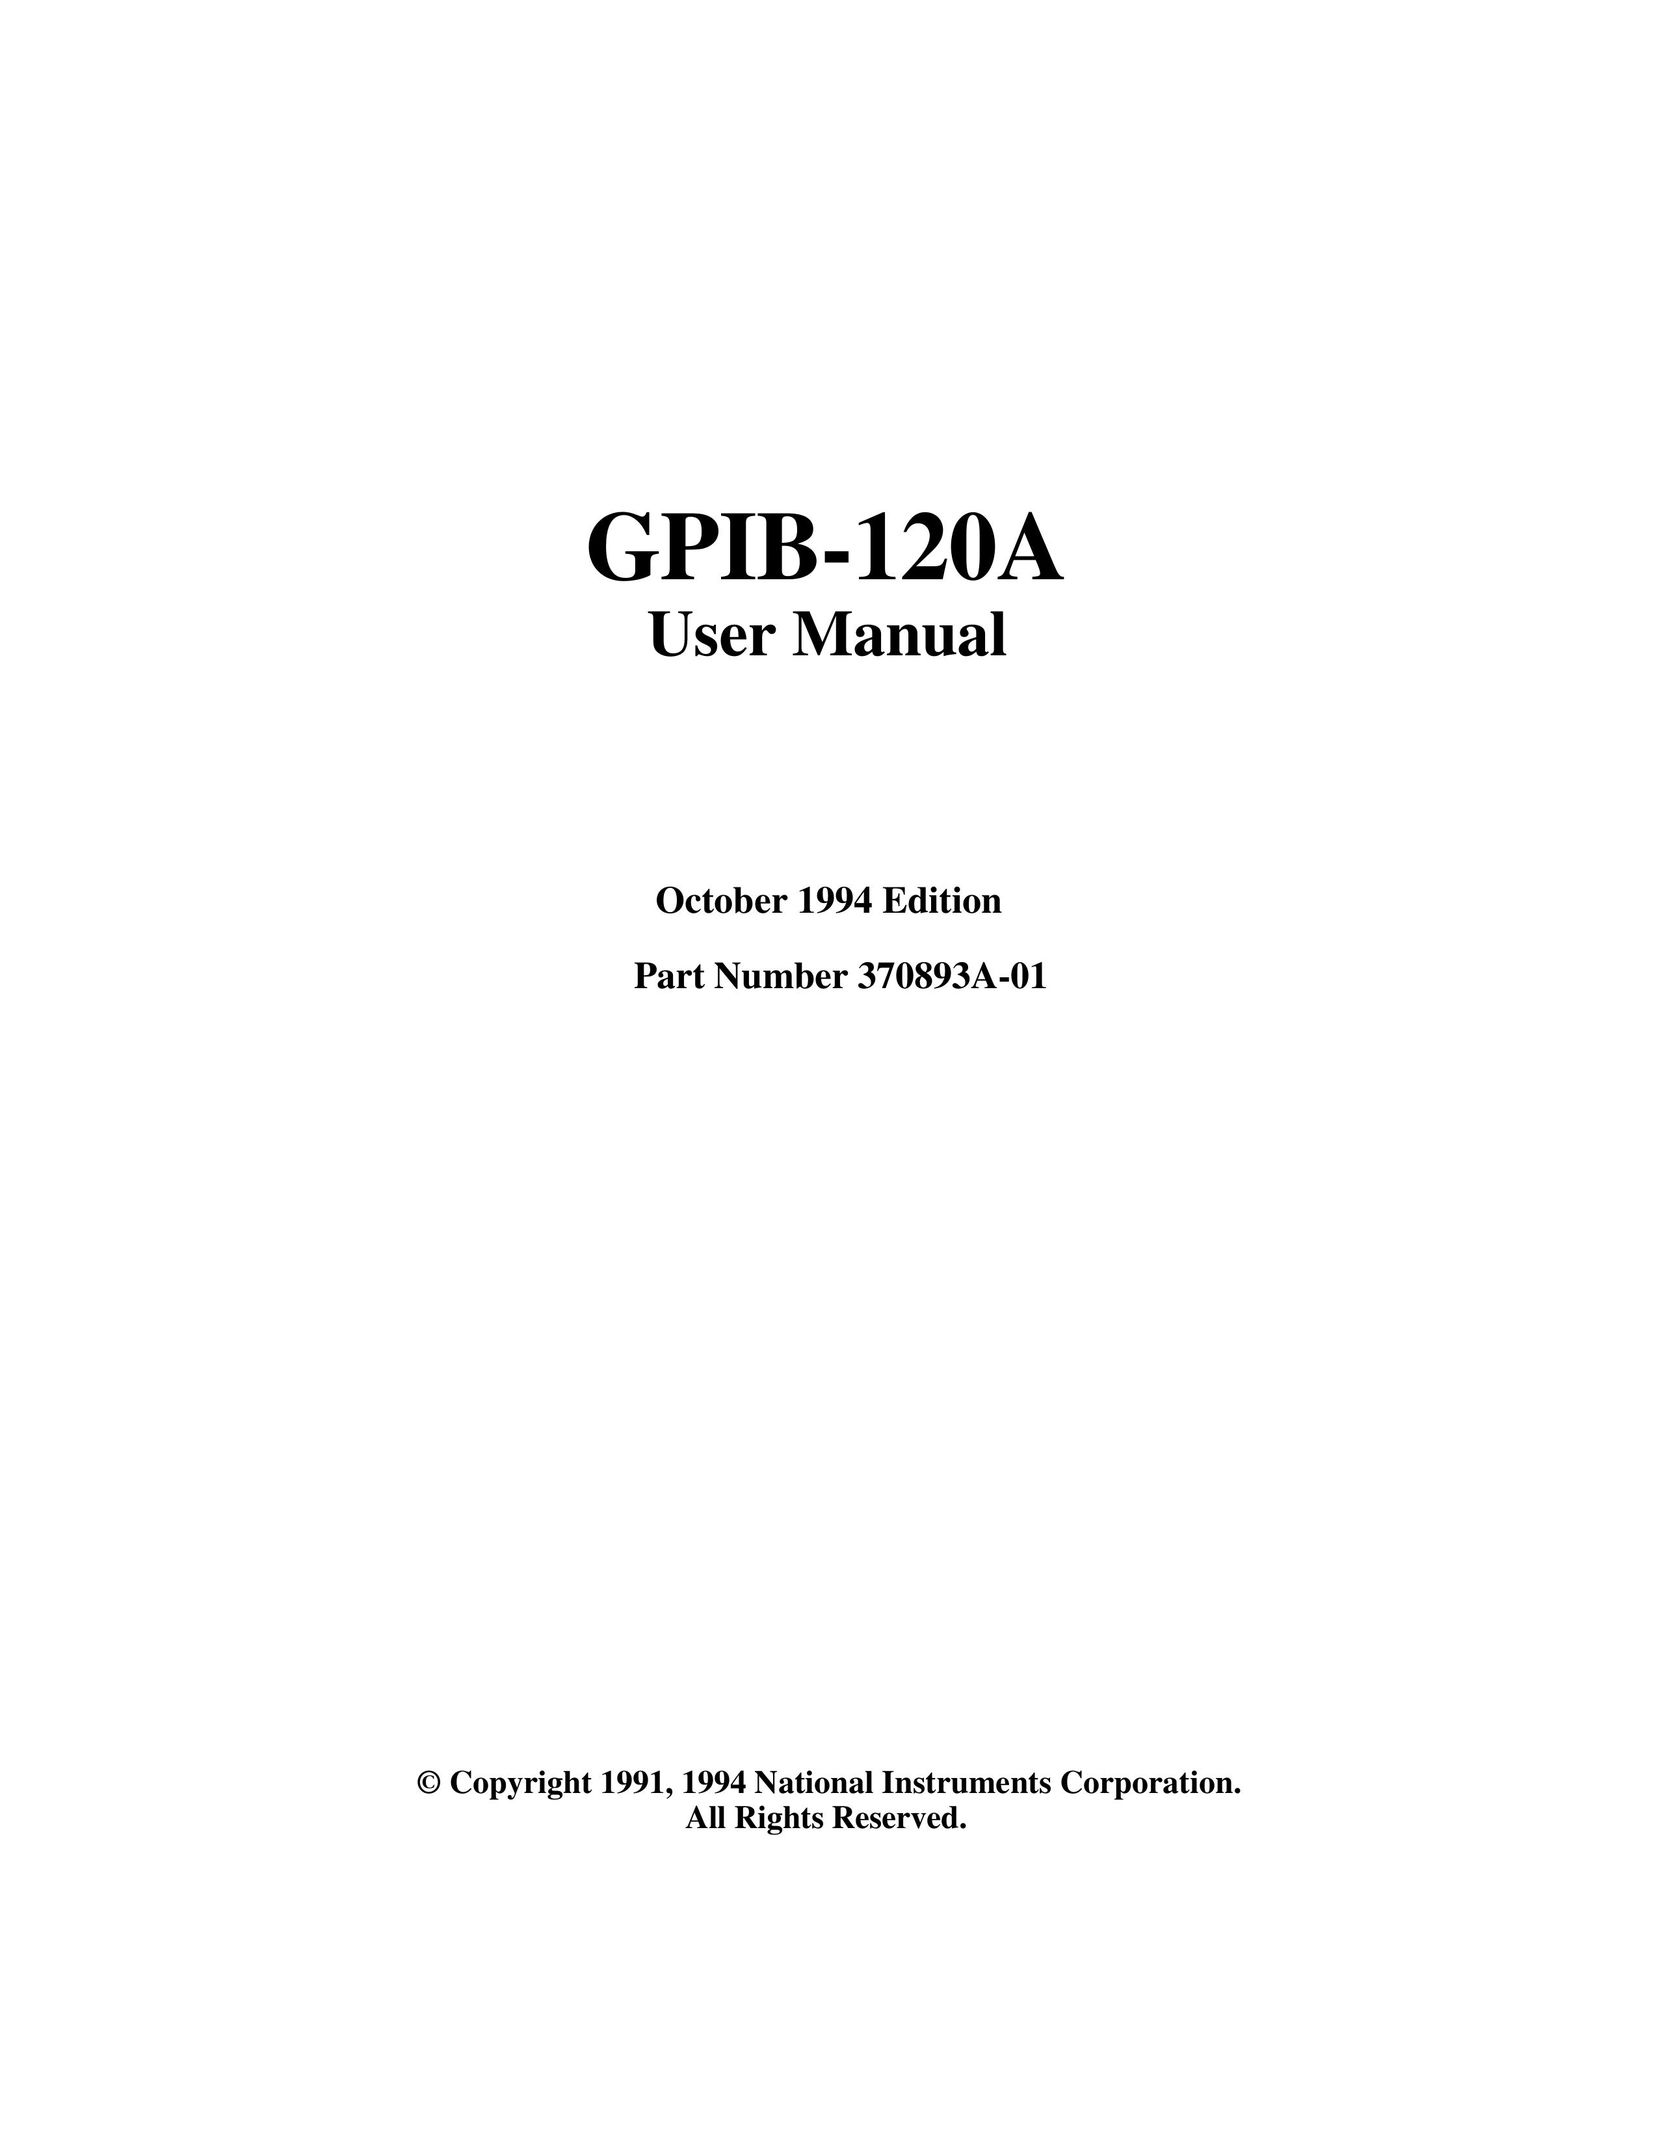 National Instruments GPIB-120A Network Router User Manual